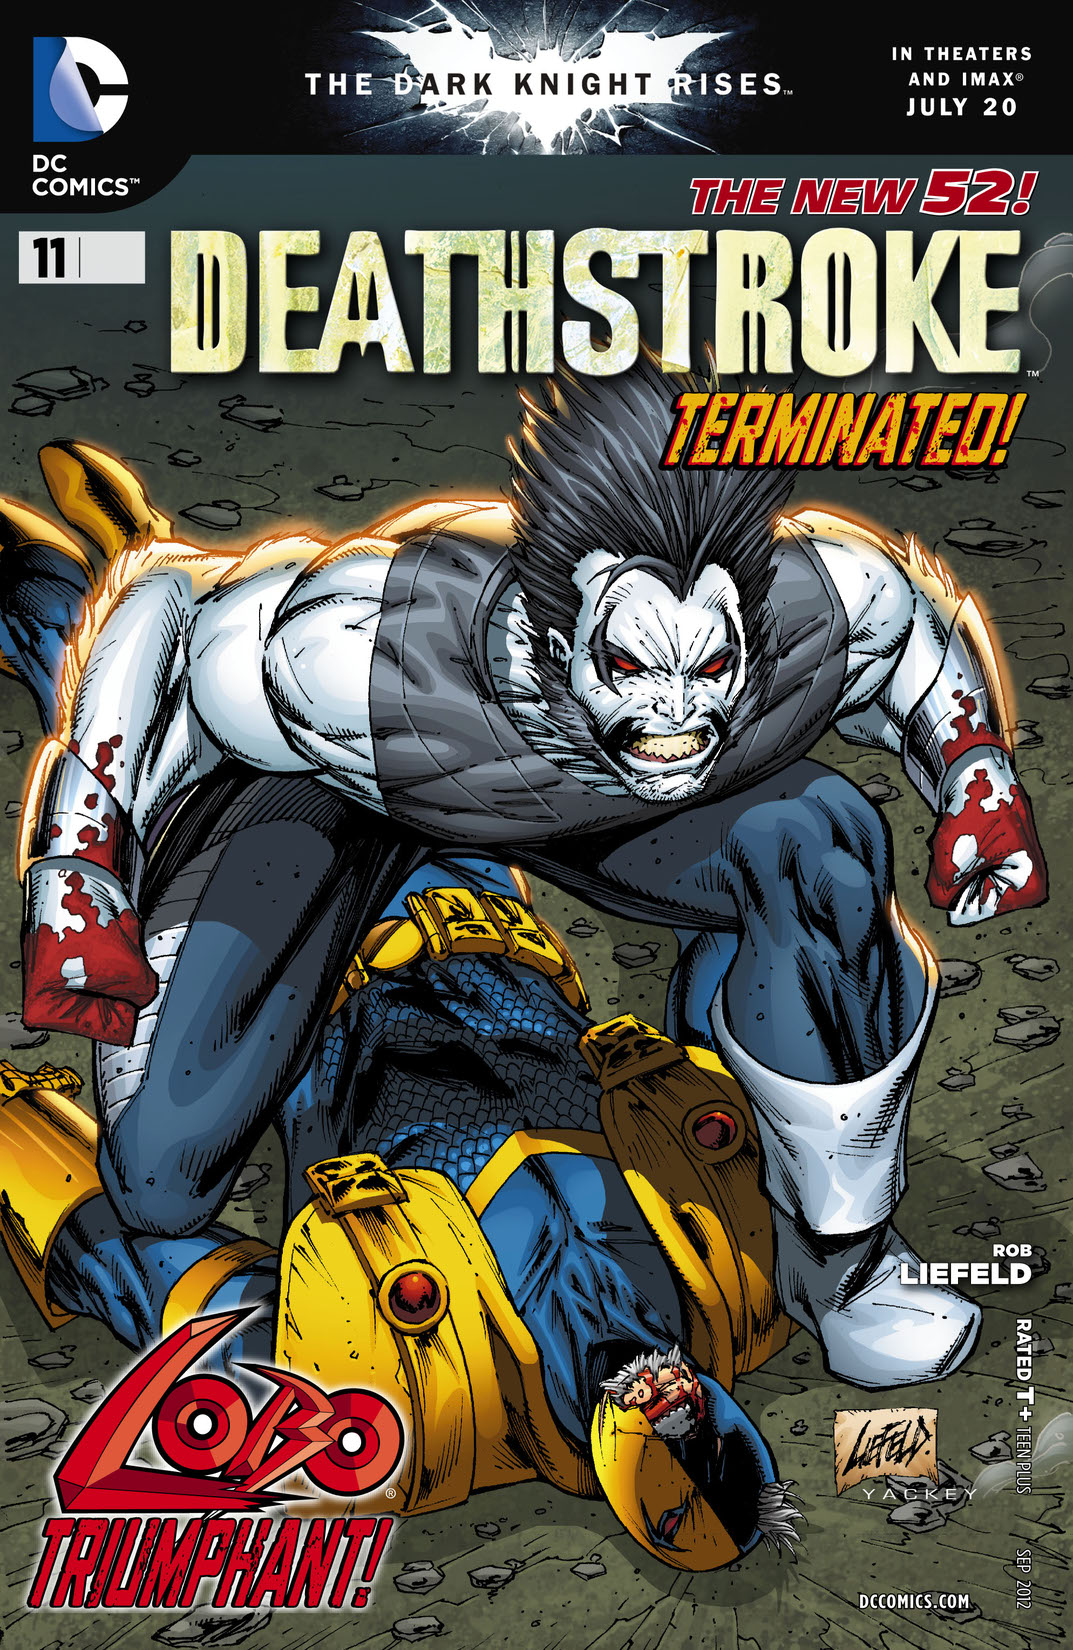 Deathstroke (2011-) #11 preview images